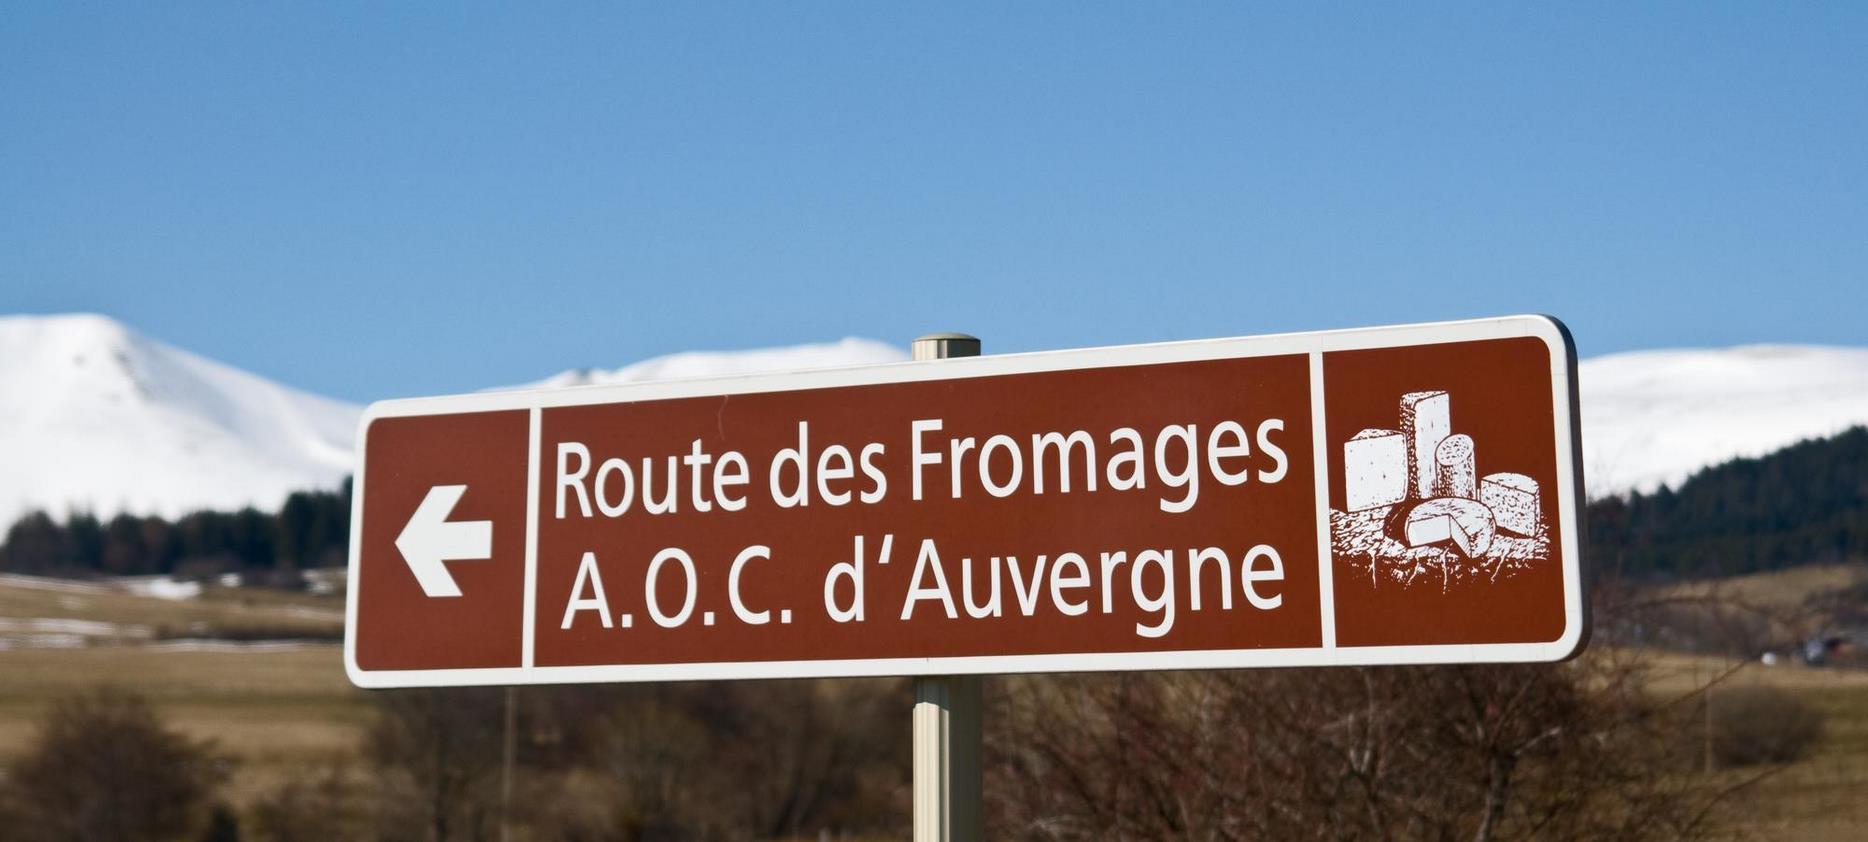 The Auvergne Cheese Route